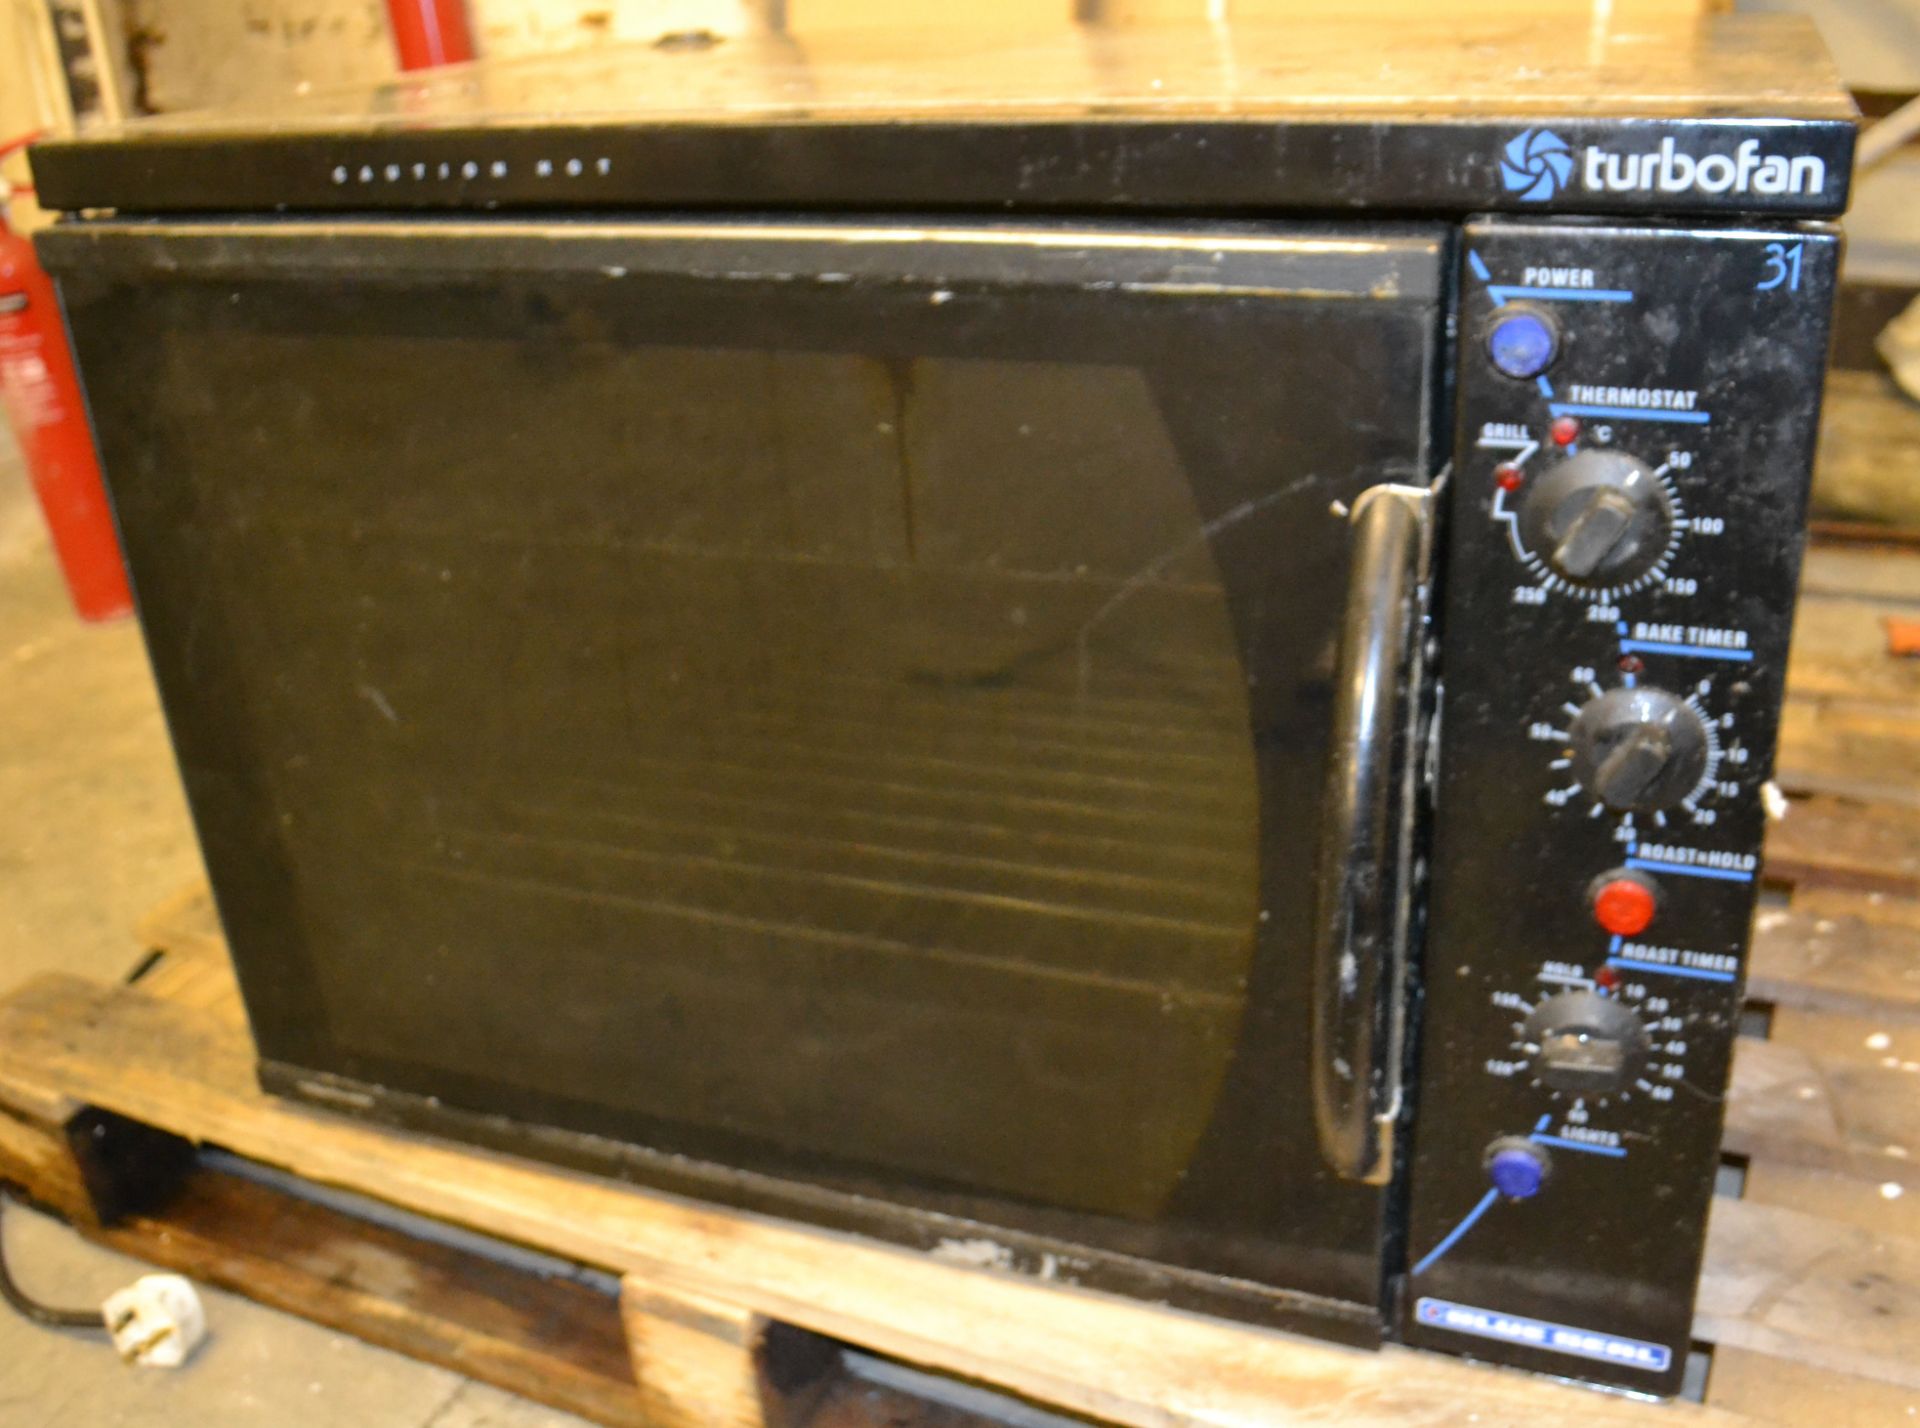 1 x Blue Seal E31 Turbofan Convection Oven - Ref: FJC012 - CL124 - Location: Bolton BL1 - Used - Image 5 of 7